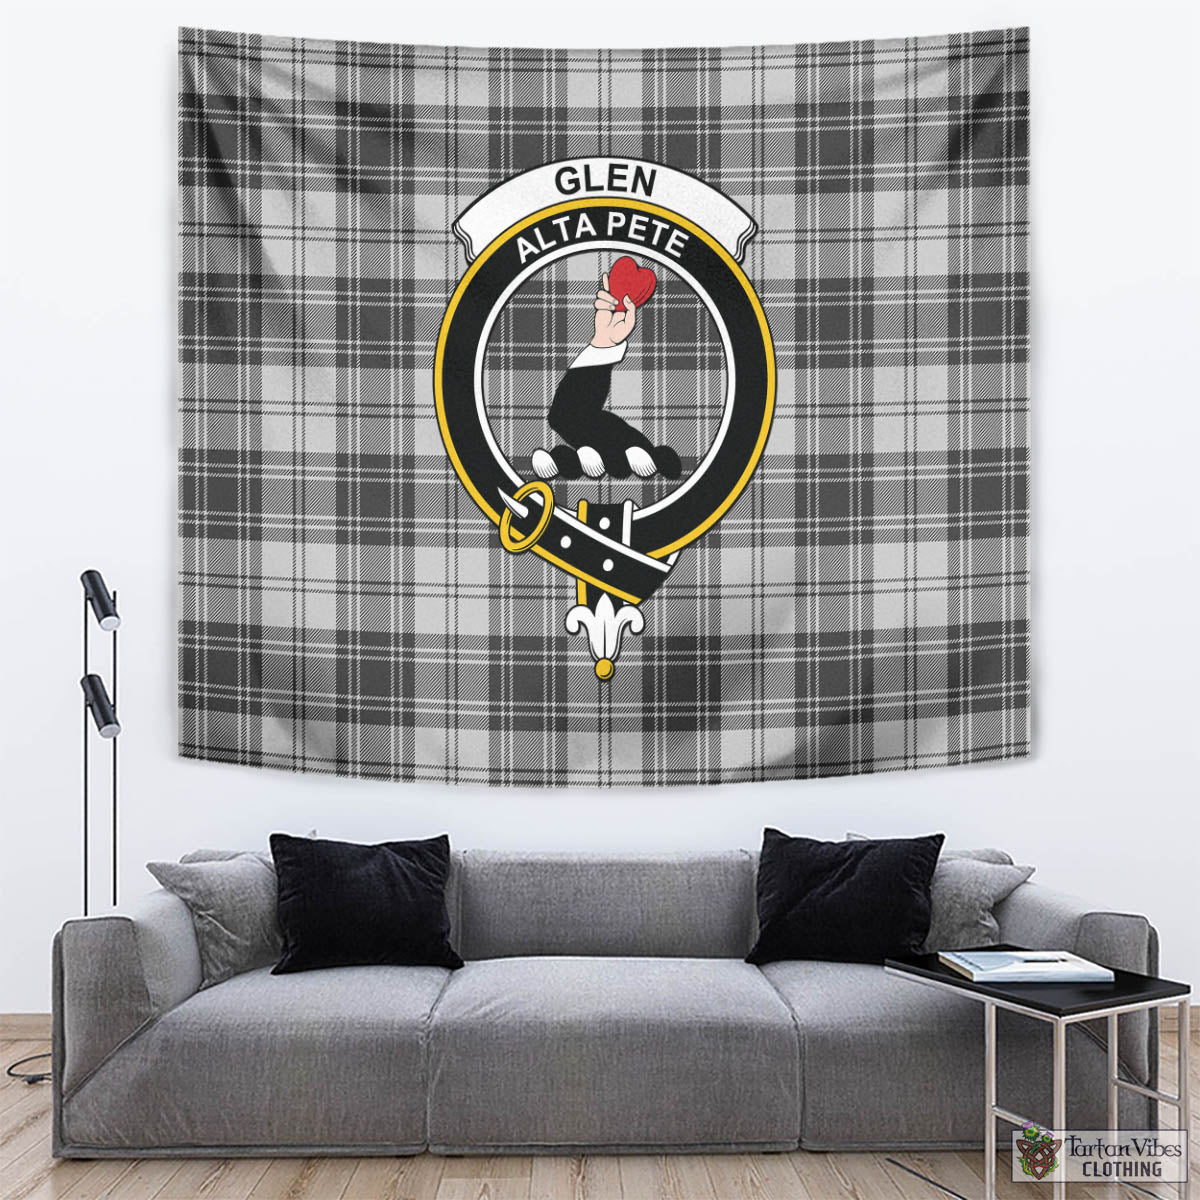 Tartan Vibes Clothing Glen Tartan Tapestry Wall Hanging and Home Decor for Room with Family Crest